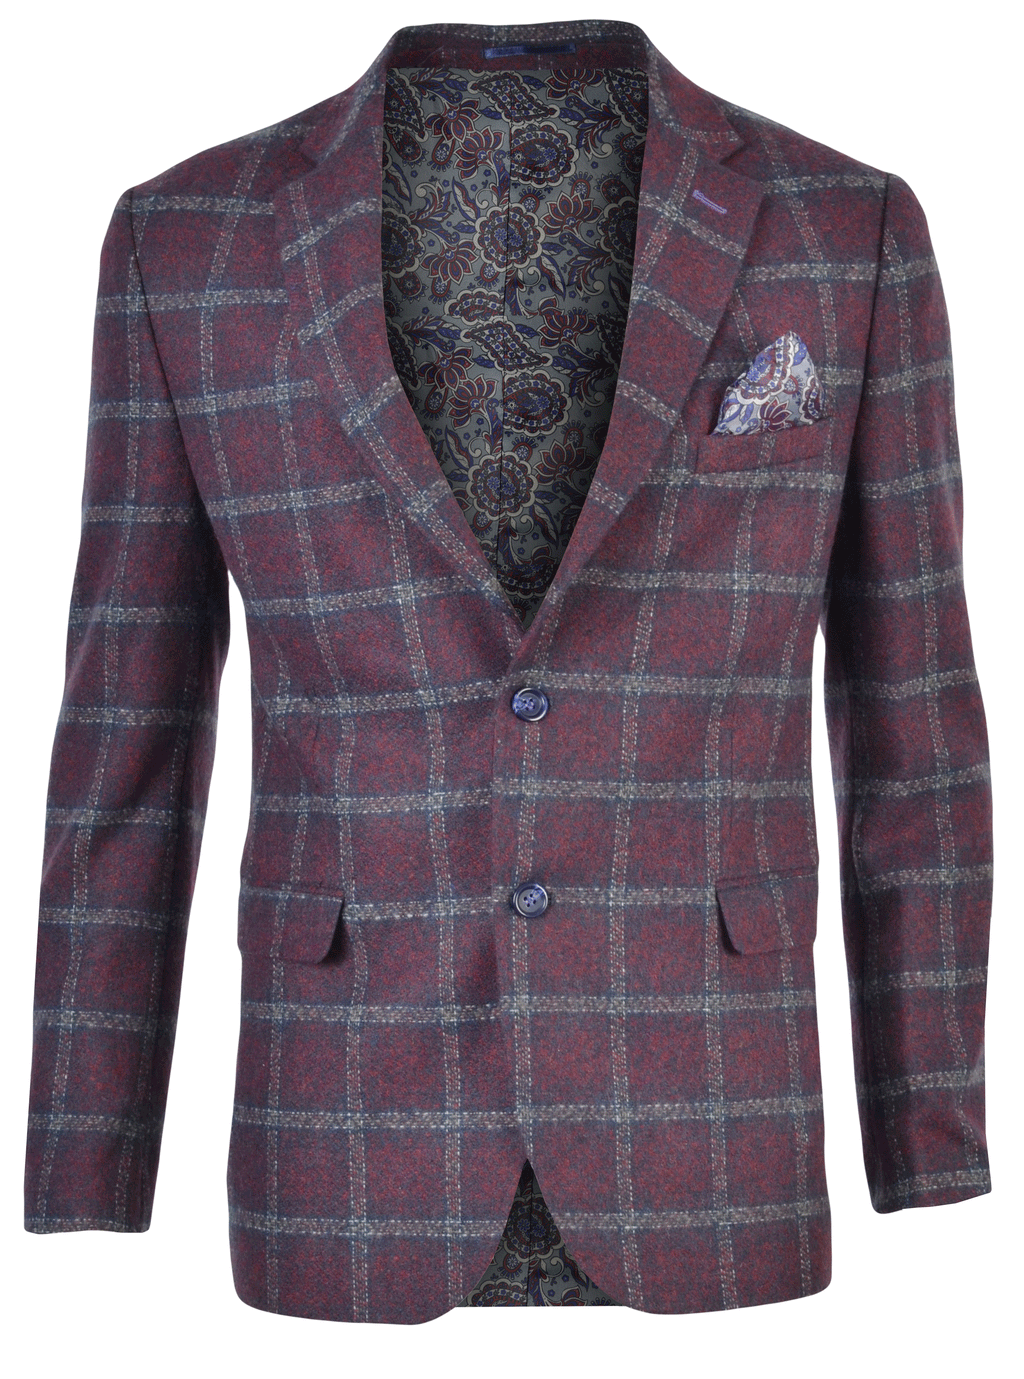 Add sophistication and style to your wardrobe with this designer men's blazer. Crafted with a modern fit, it features a luxurious blend of 50% wool, 35% polyester, and 15% viscose, while the inner lining is made from 100% polyester. Exude effortless elegance in the sophisticated burgundy hue.